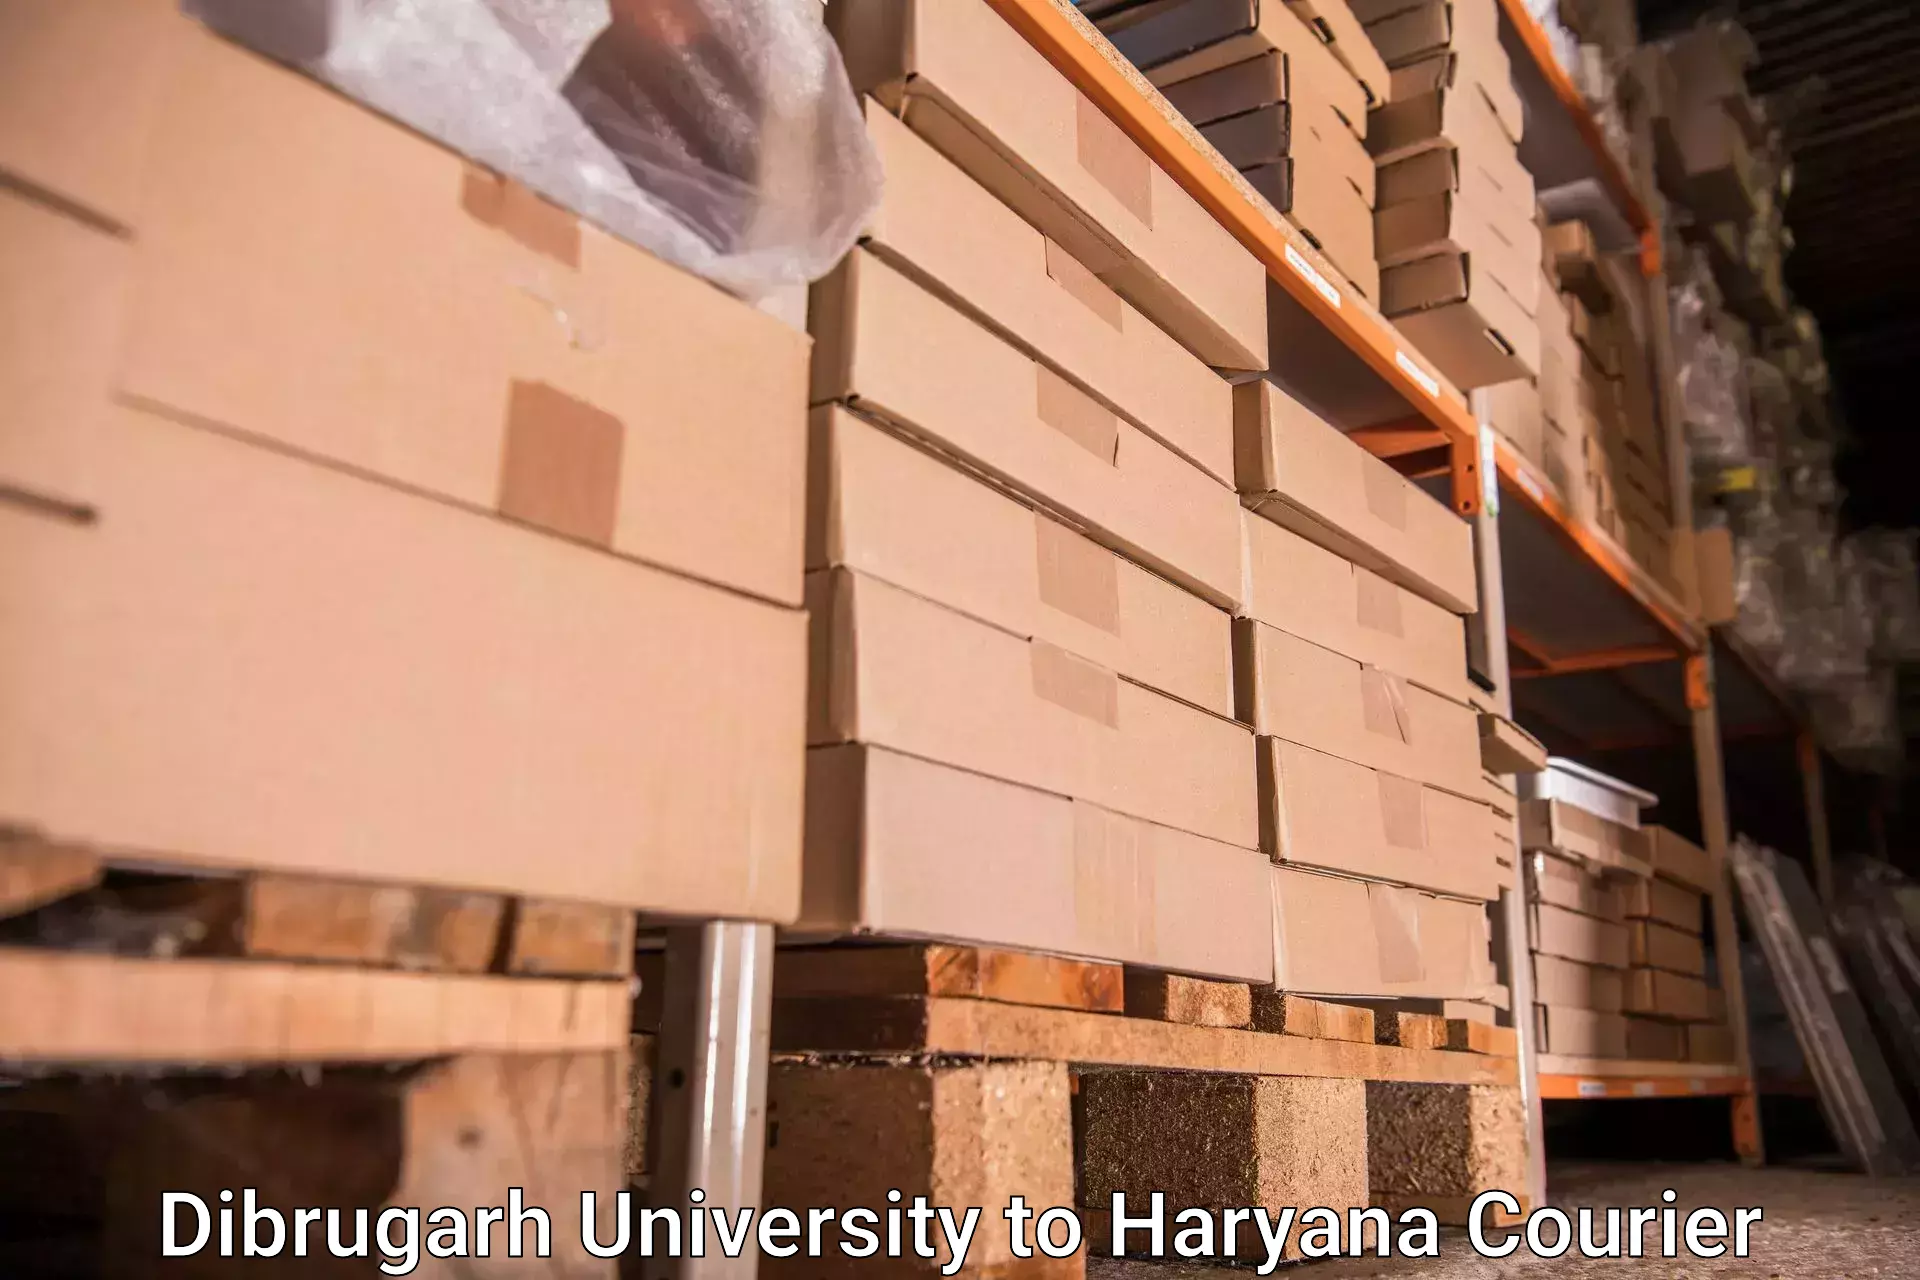 Luggage delivery app Dibrugarh University to Gurgaon